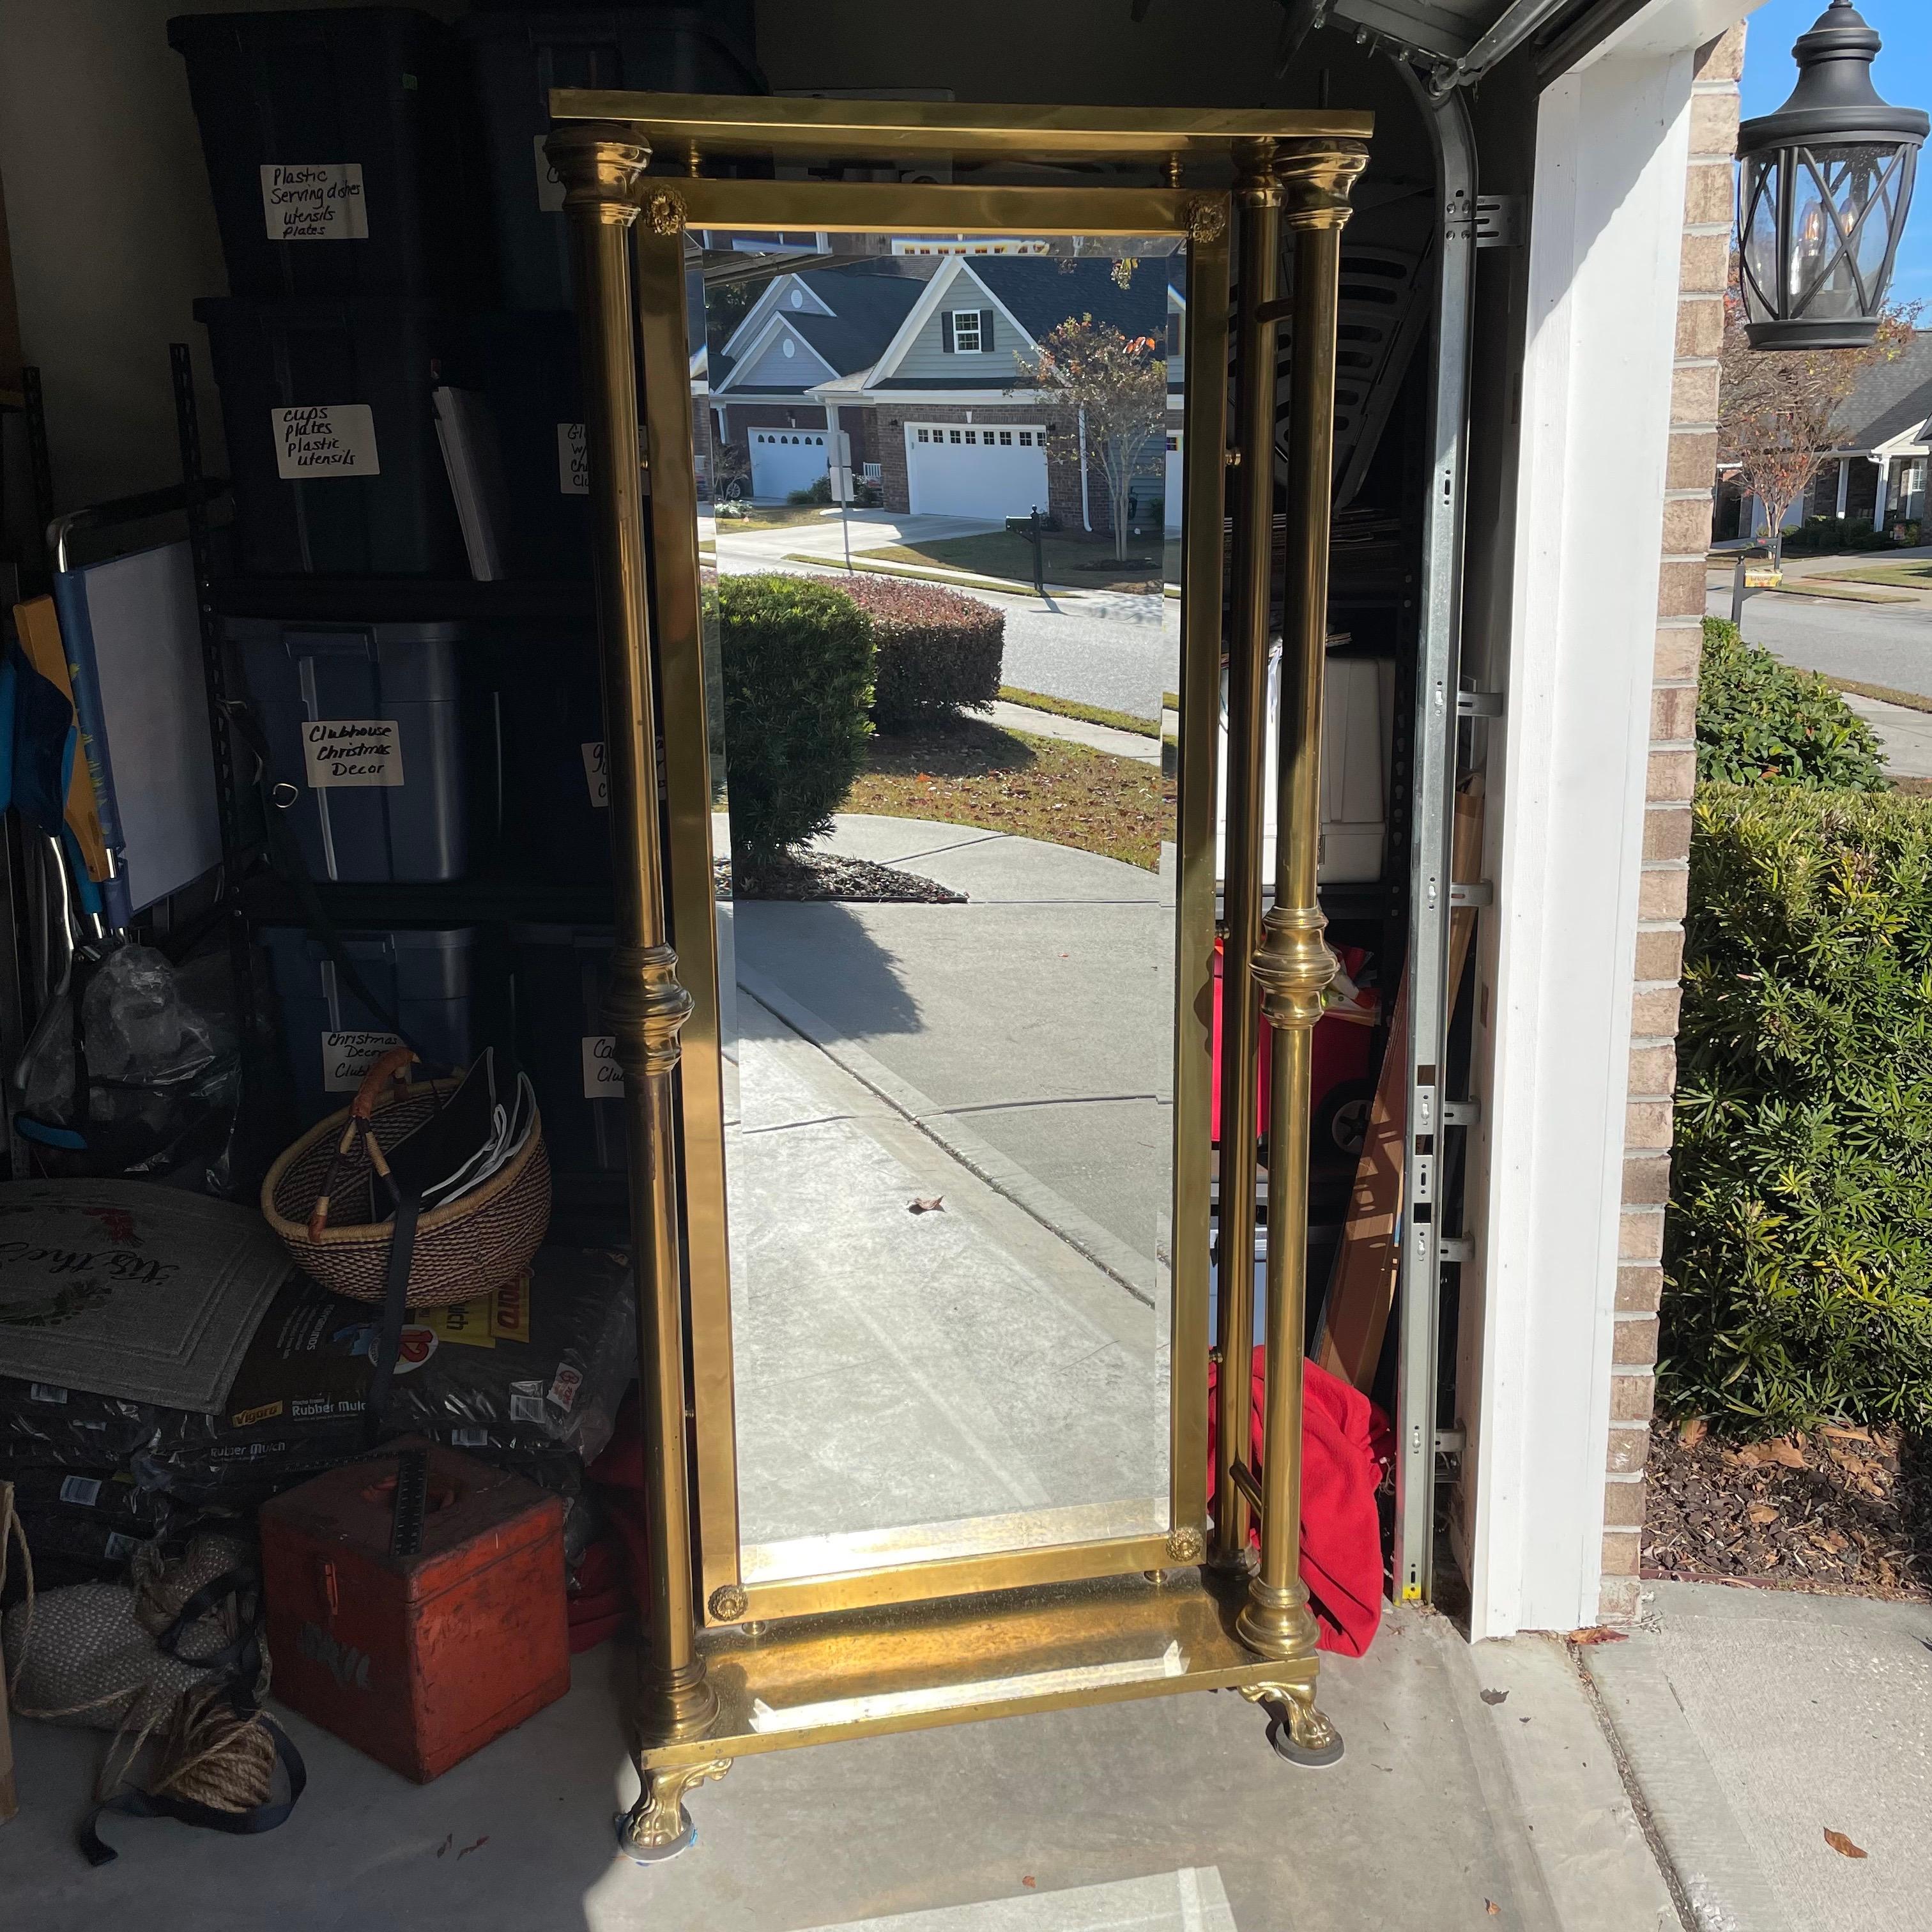 This free standing Art Deco brass floor mirror is quite the statement piece. The back is a sheet of wood to keep the mirror in place. You will not find another mirror like this! It is structurally sound with no wobbliness. The mirror is reinforced